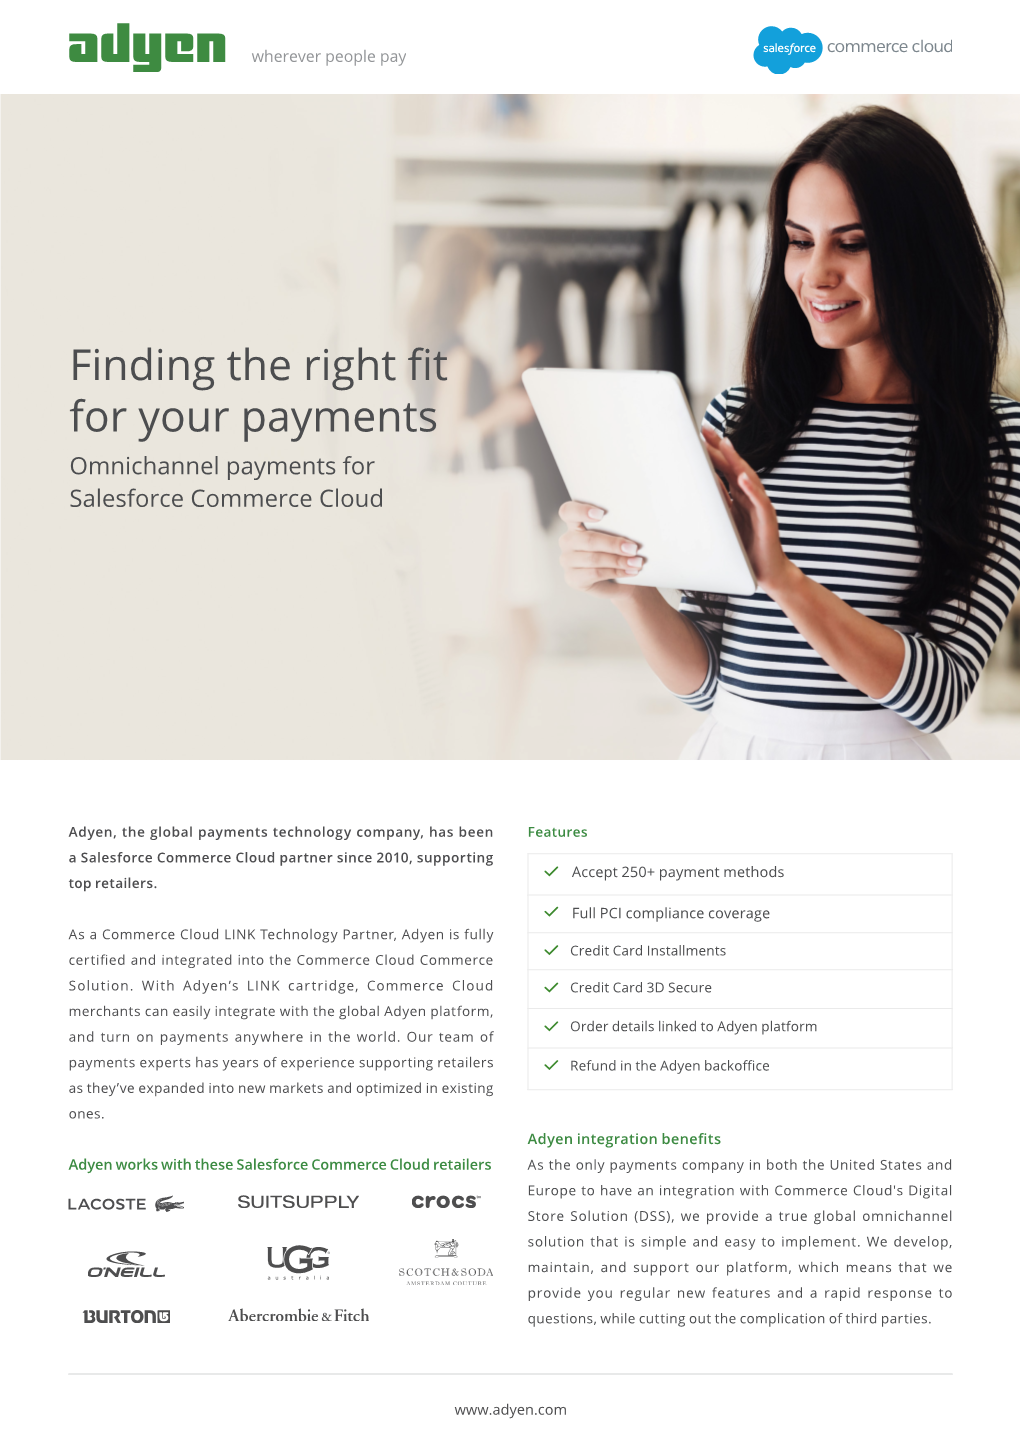 Finding the Right Fit for Your Payments Omnichannel Payments for Salesforce Commerce Cloud